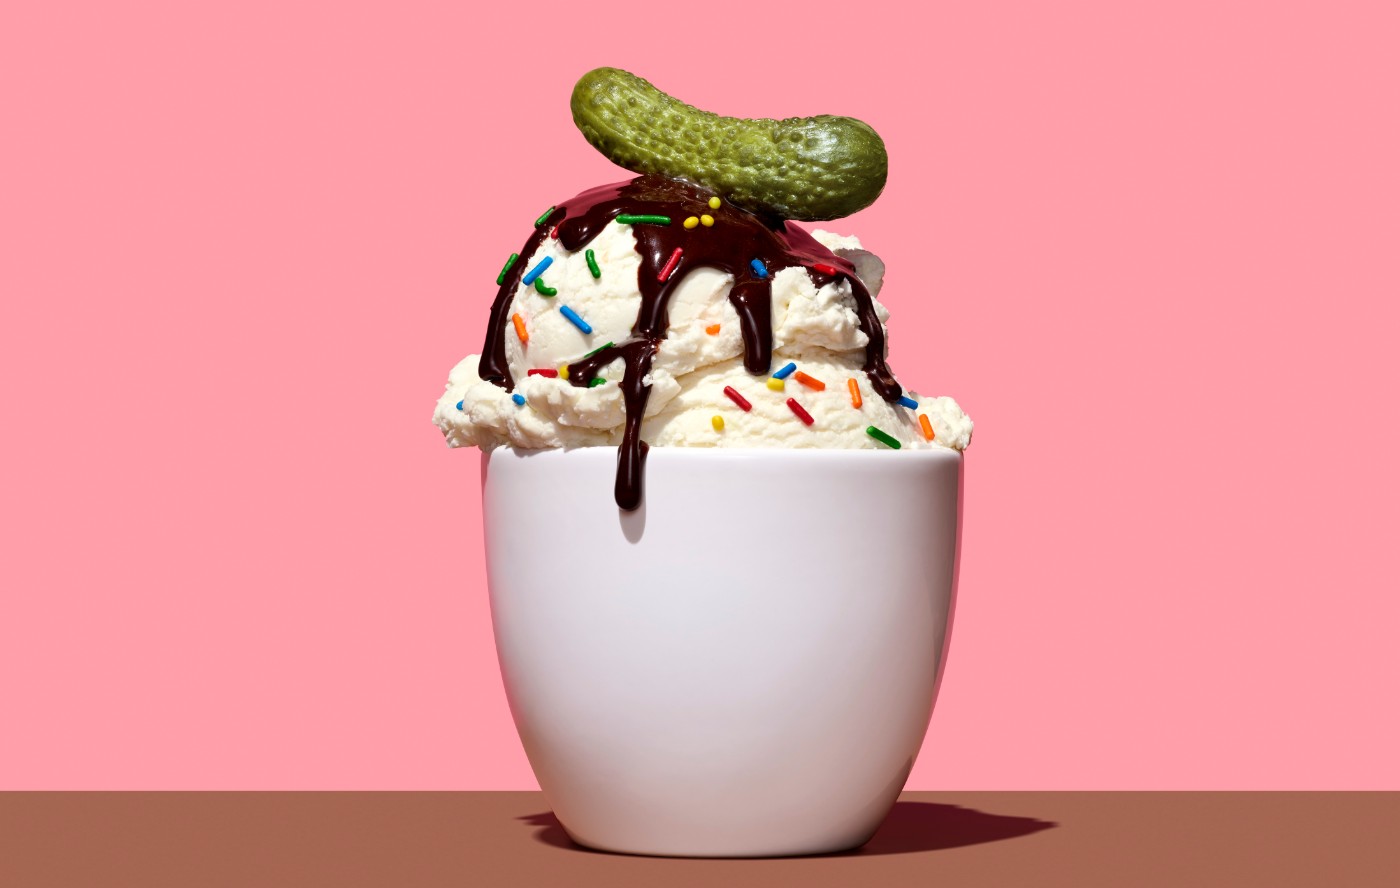 https://tickertapecdn.tdameritrade.com/assets/images/pages/md/Ice cream scoop in cup with sprinkles and chocolate with a pickle on top